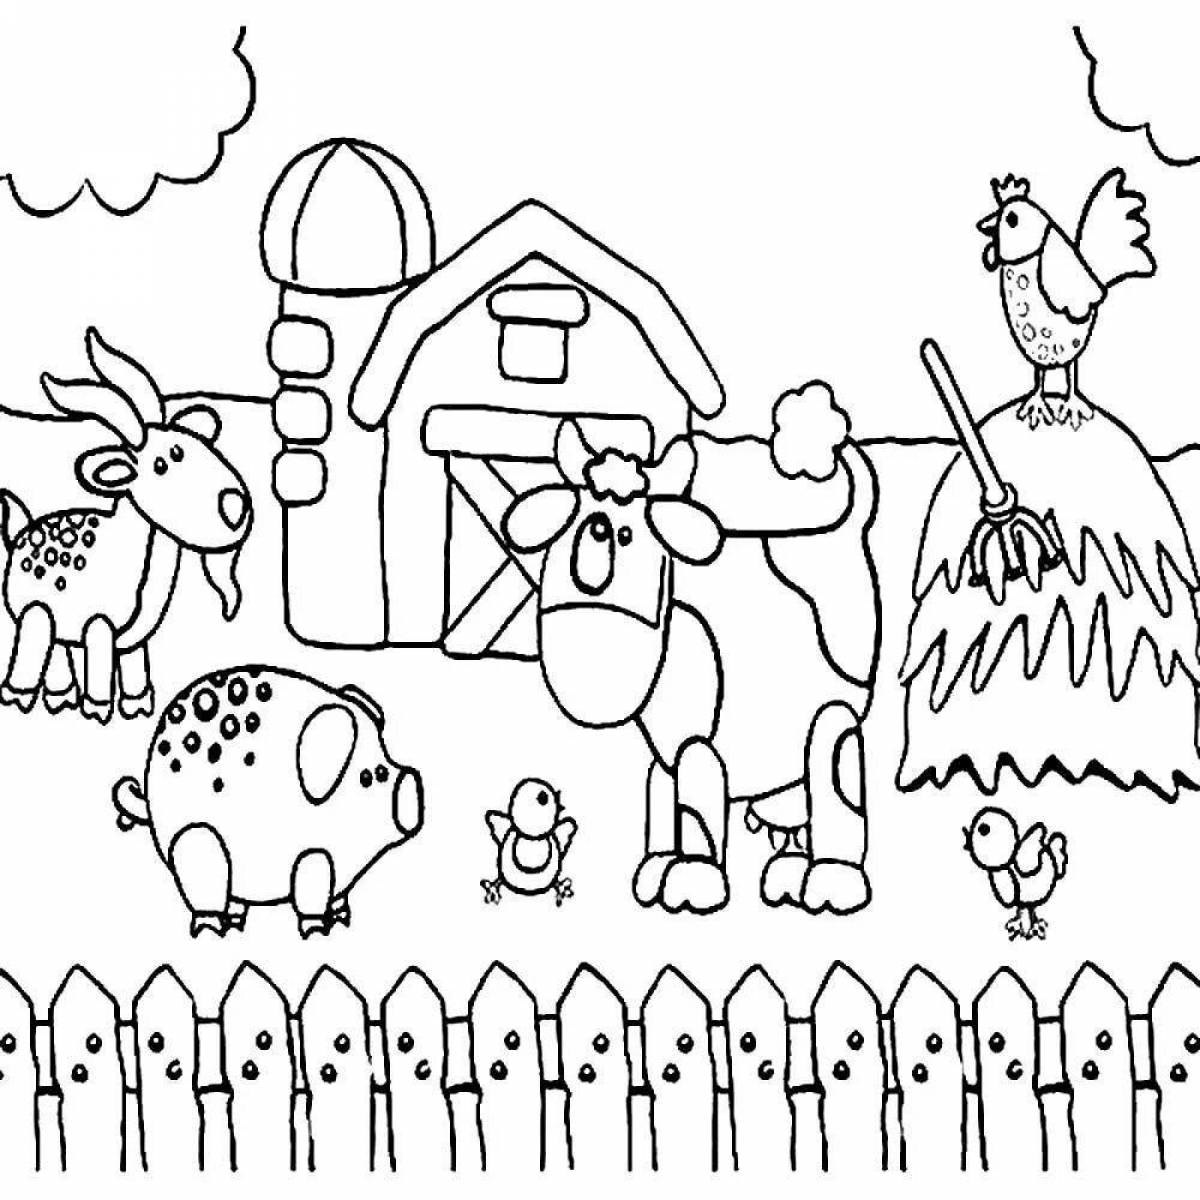 Coloring fairy village for kids